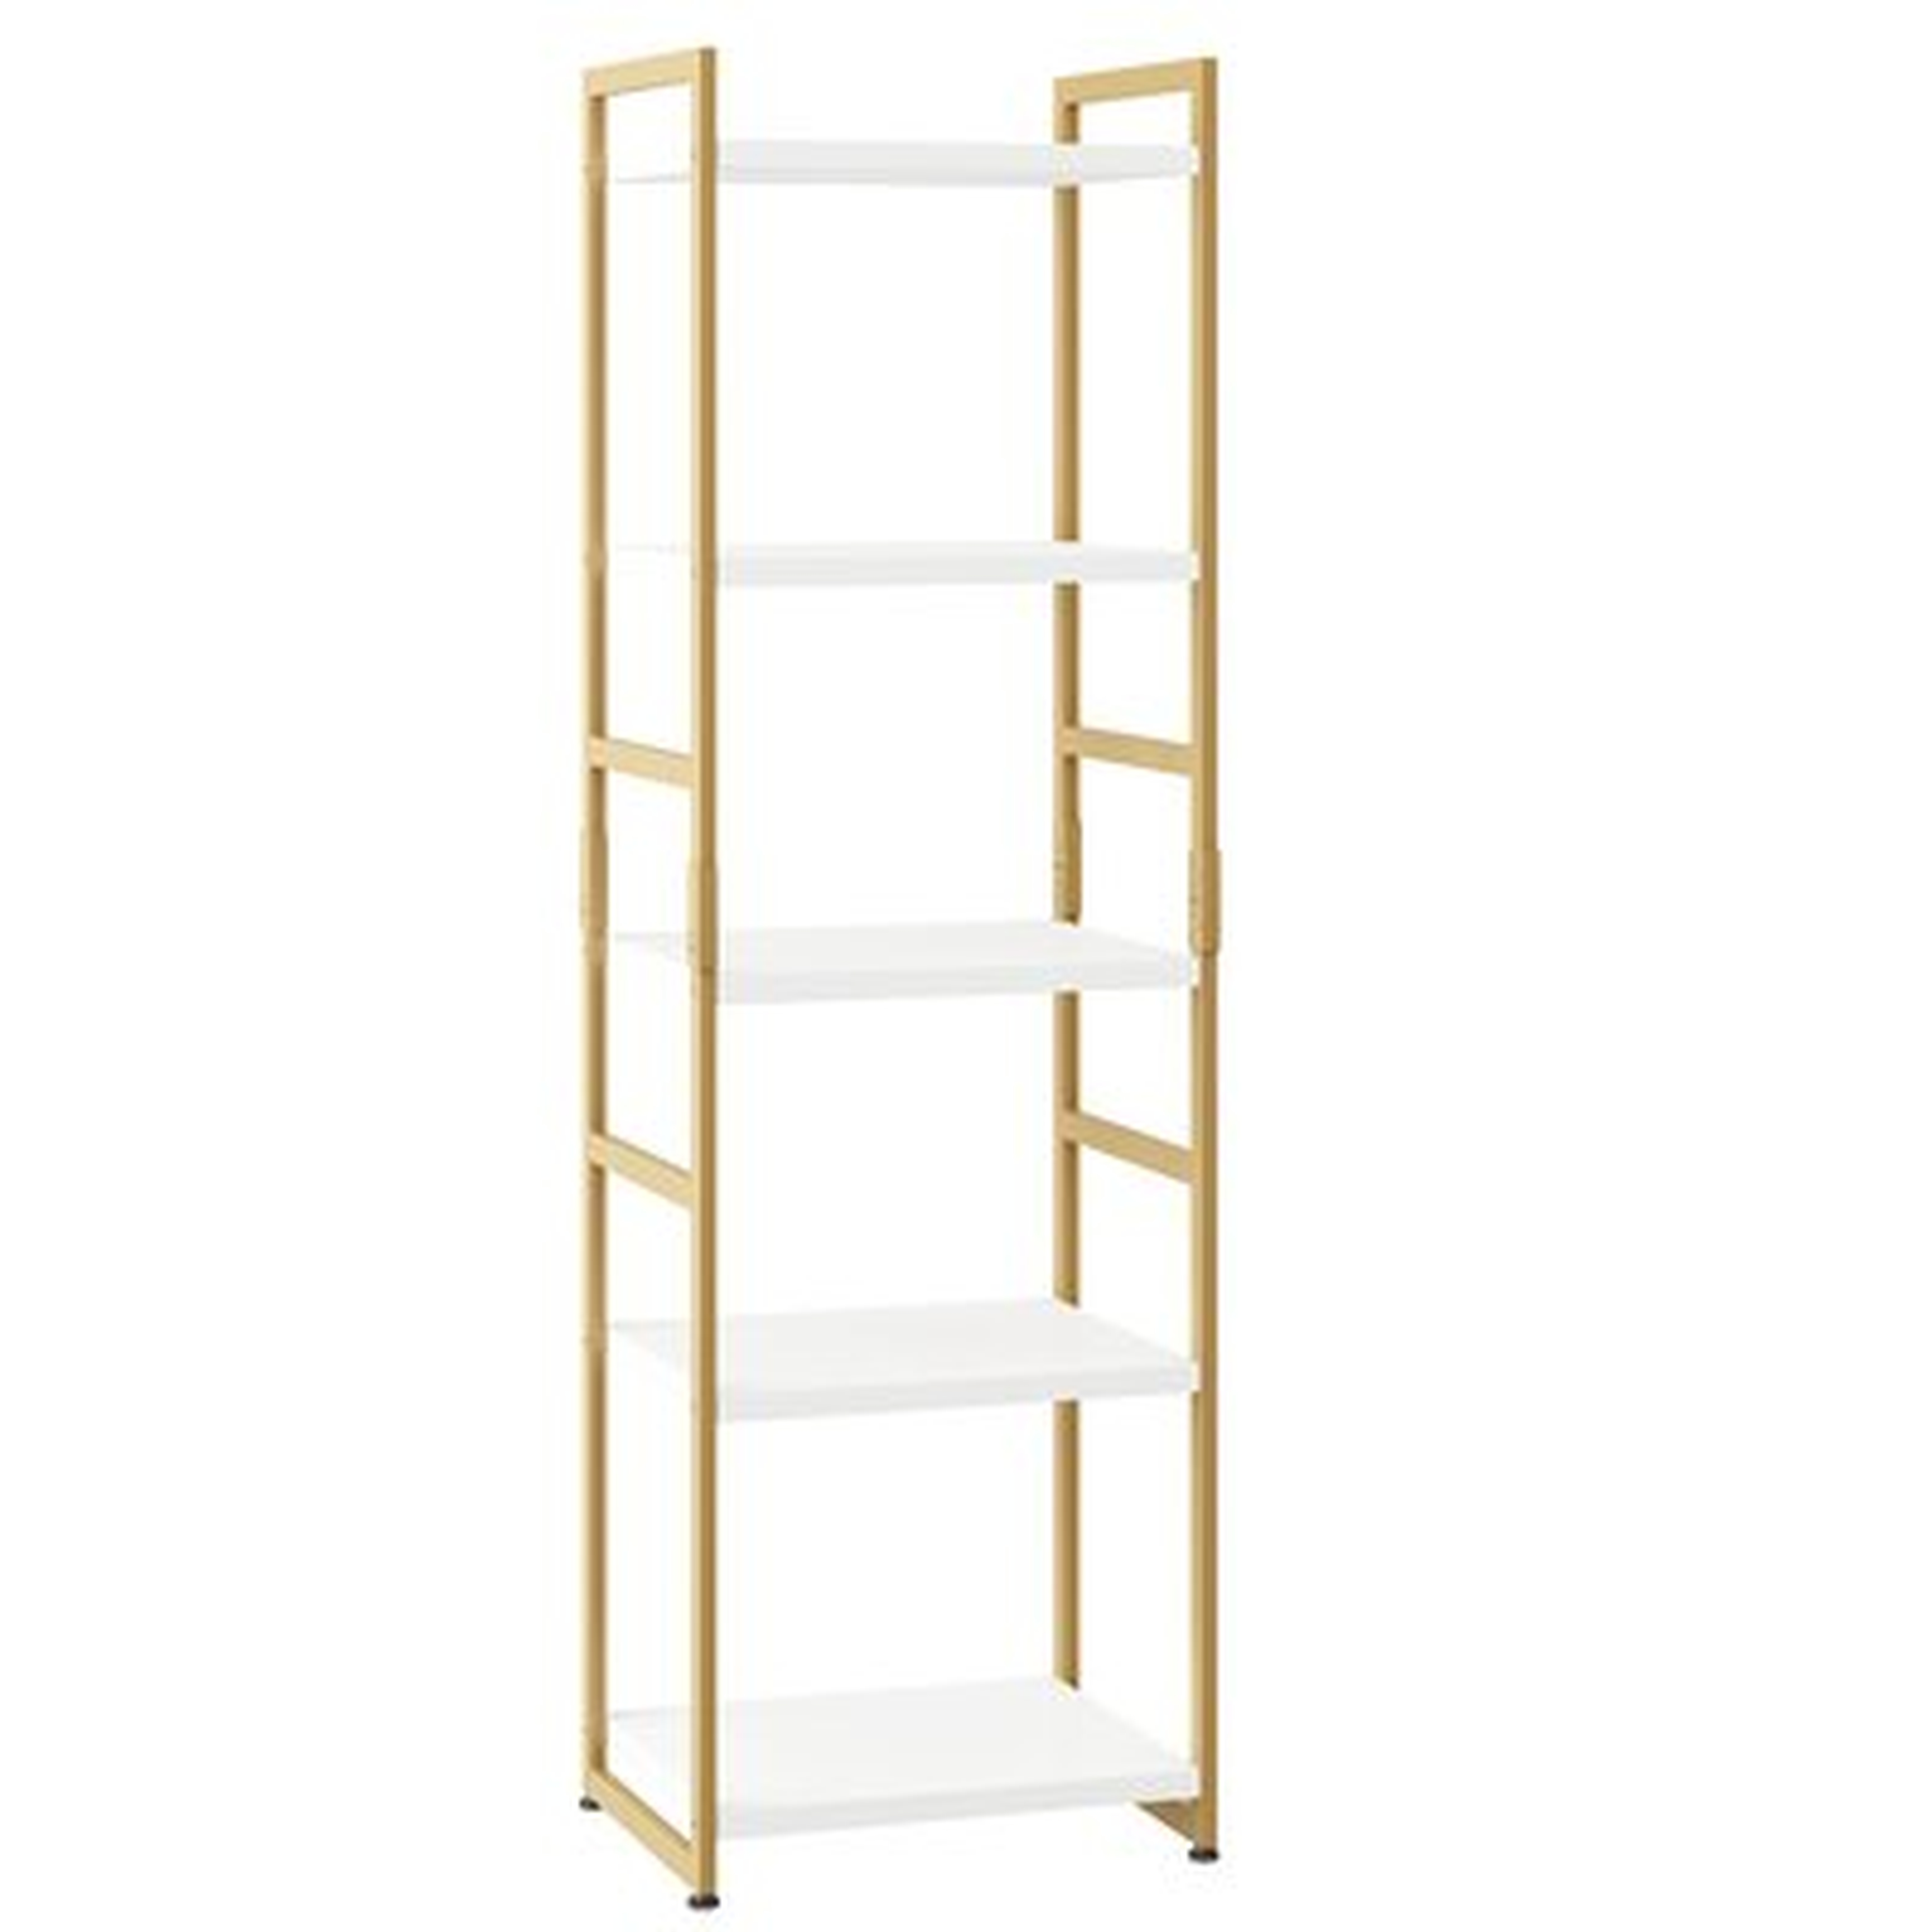 5 Tier Industrial Rustic Wood Bookcase, Modern Home Decor Standing Metal Frame Book Shelves For Living Room, Bedroom And Office, 5-Shelf, White/Gold - Wayfair